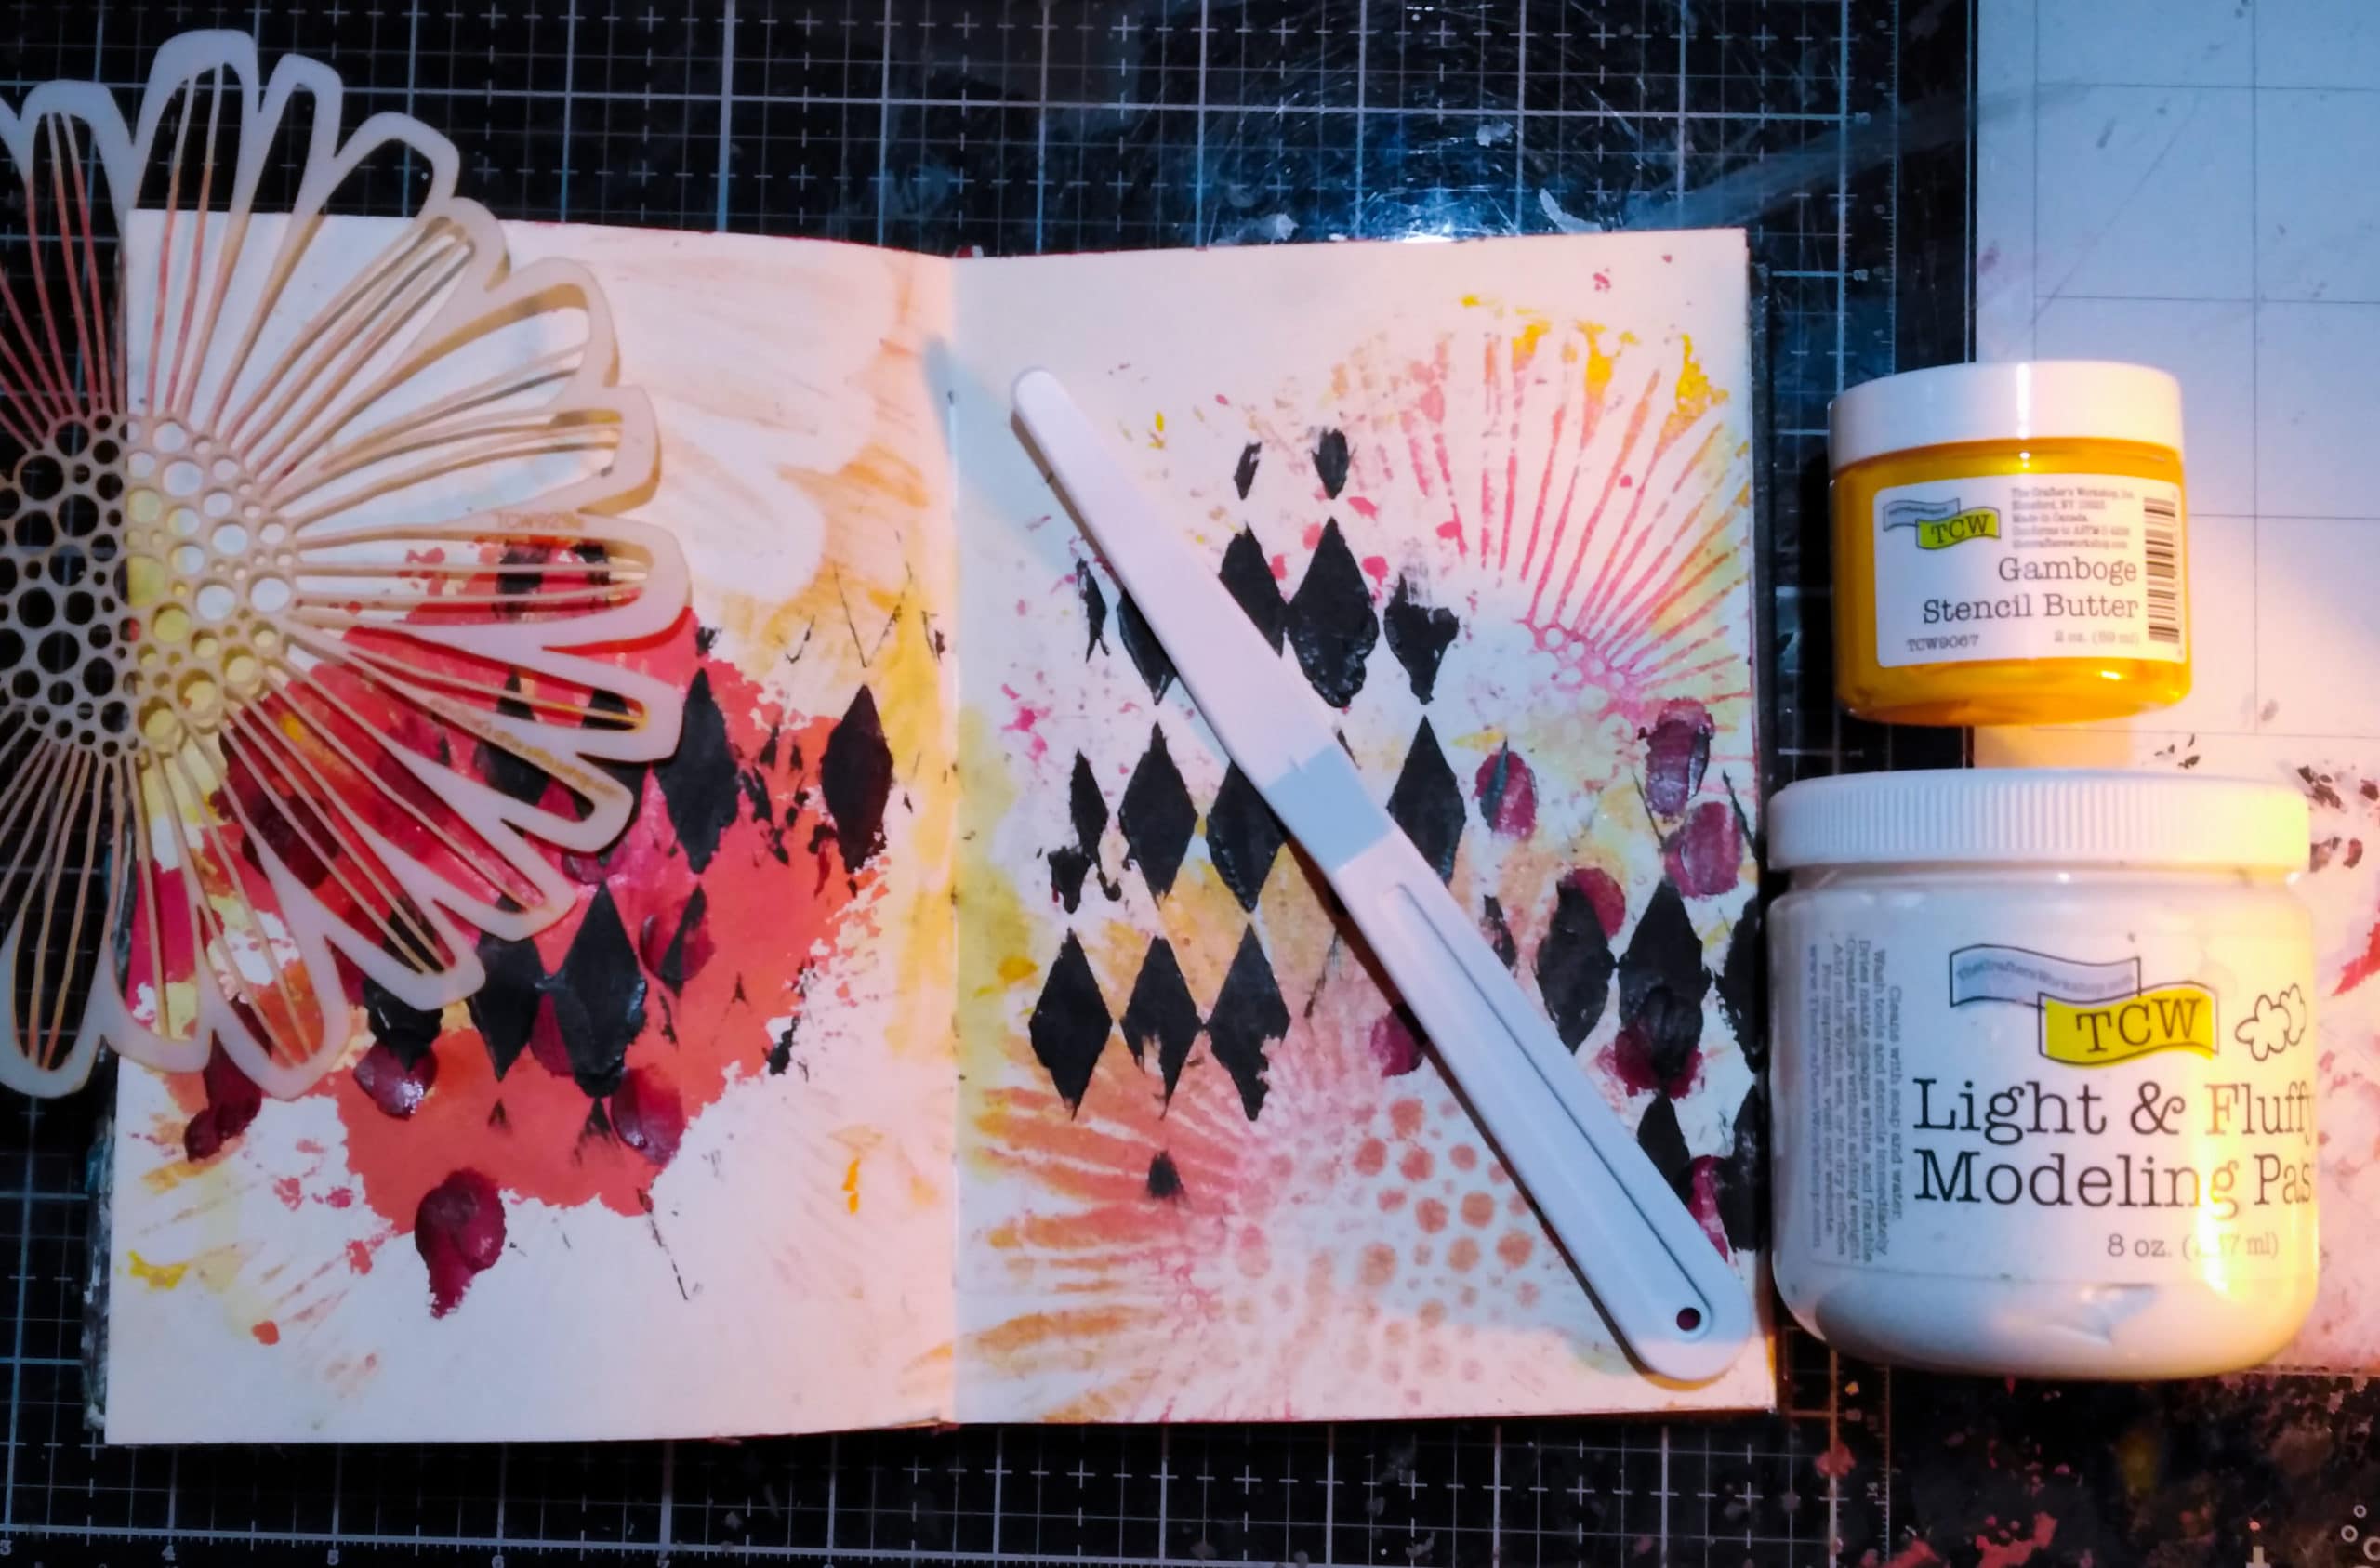 Art journal spread, background stenciling with the Crafter's Workshop stencils, modeling pastes and stencil butter